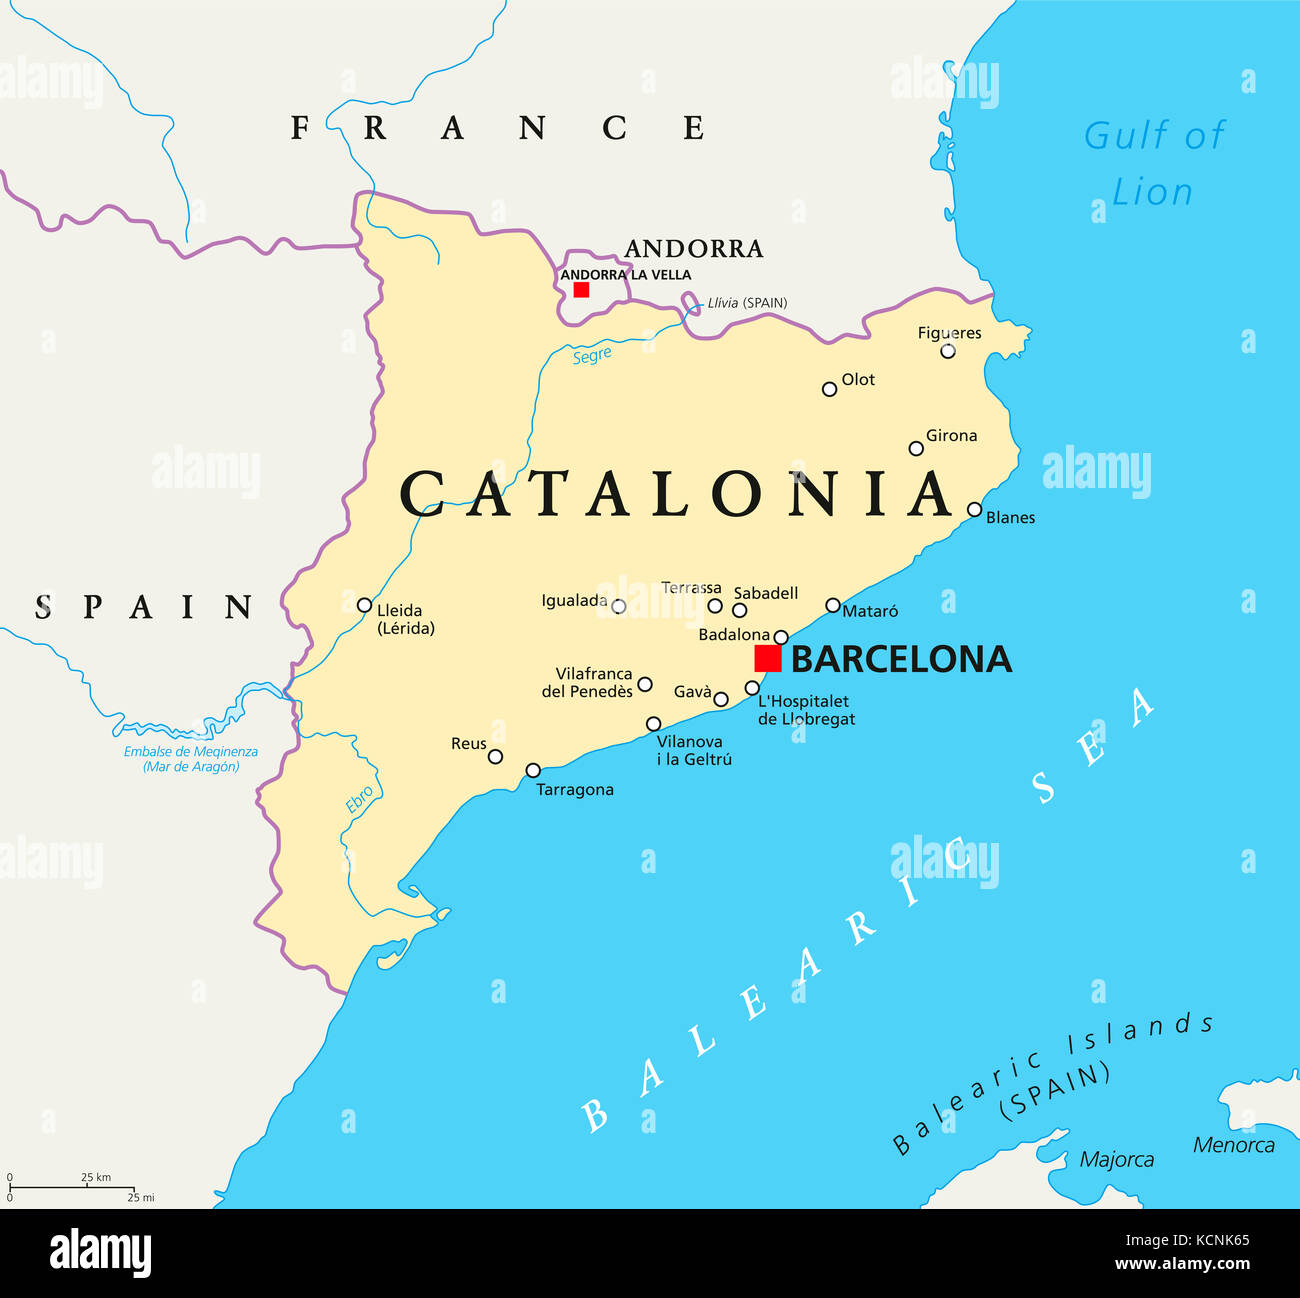 Catalonia political map with capital Barcelona, borders and important cities. Autonomous community of Spain on the Iberian Peninsula. Illustration. Stock Photo